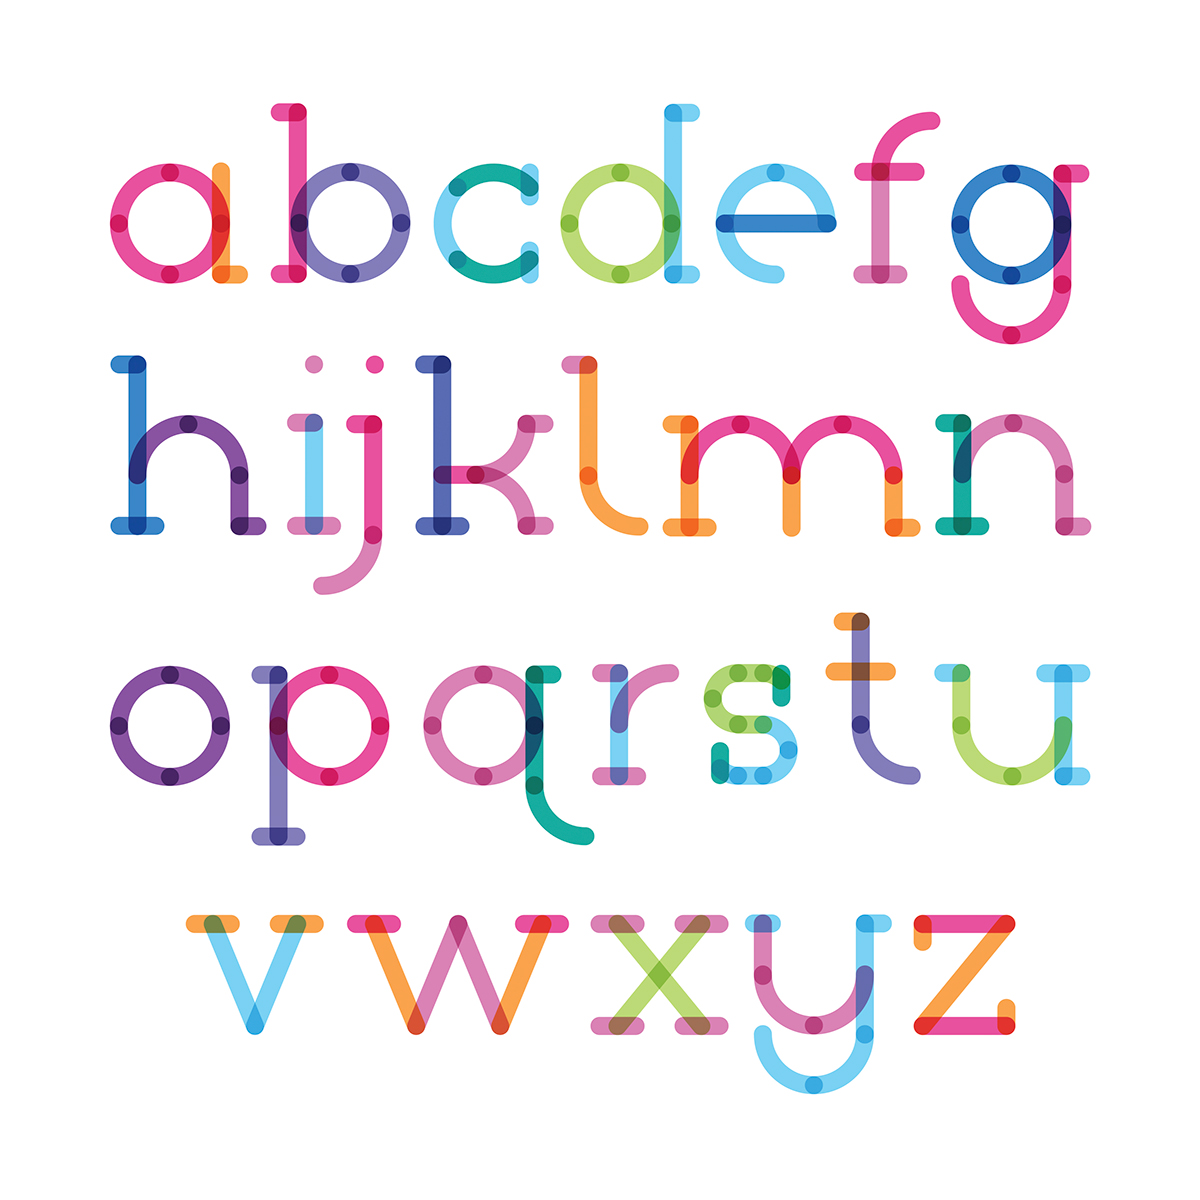 font# typo# typography# design# letter# color# transparency# serif#